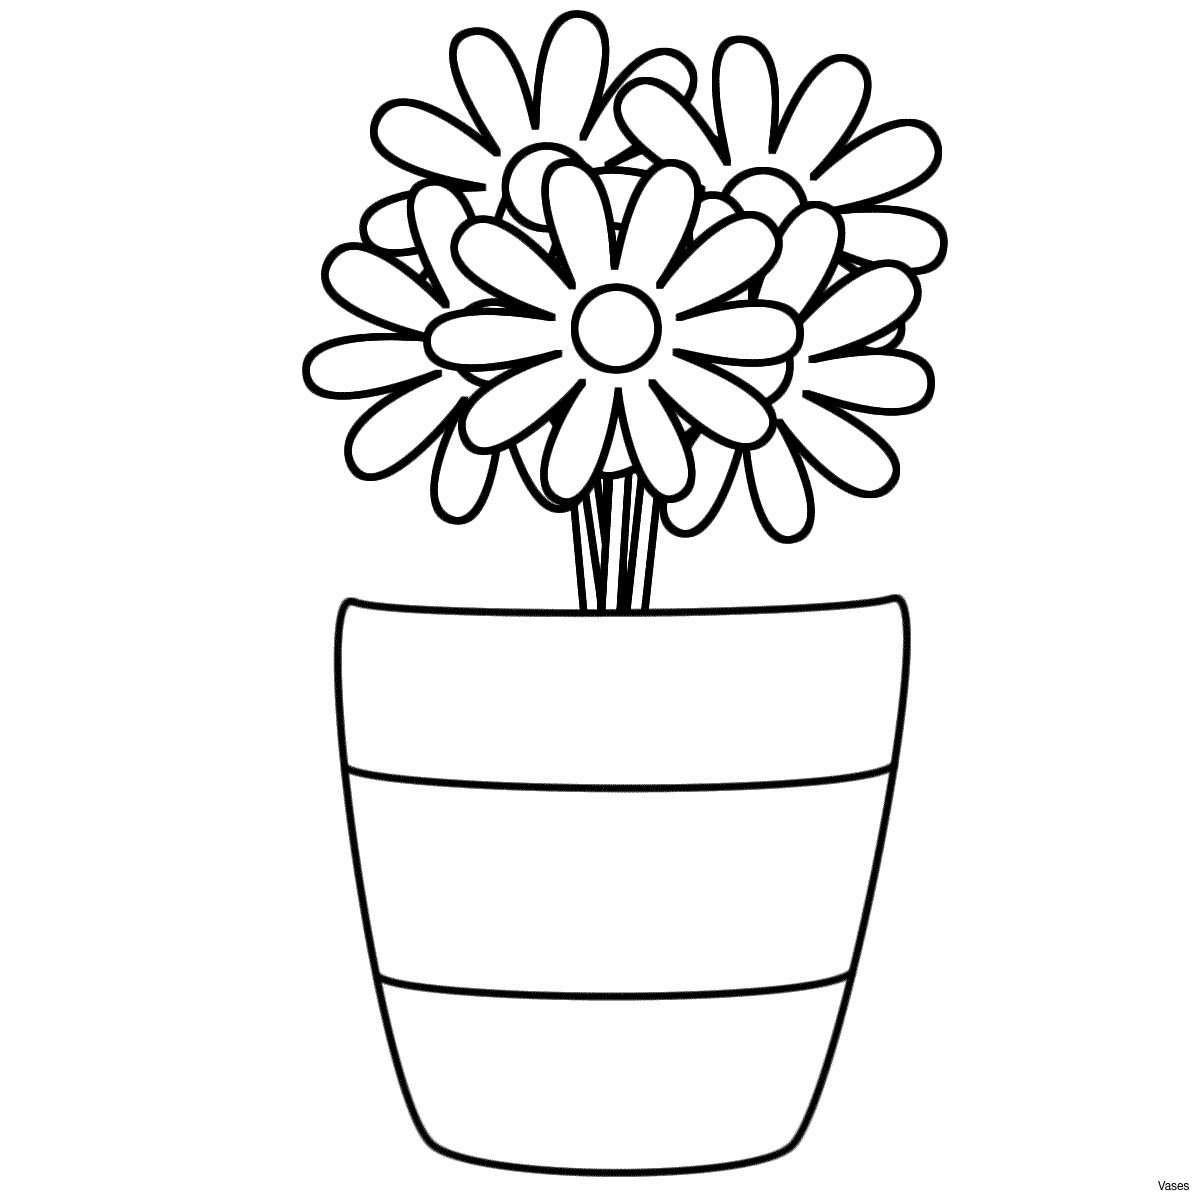 round flower vase of a coloring page best of cloring book awesome cool vases flower vase in a coloring page inspirational cool vases flower vase coloring page pages flowers in a top i